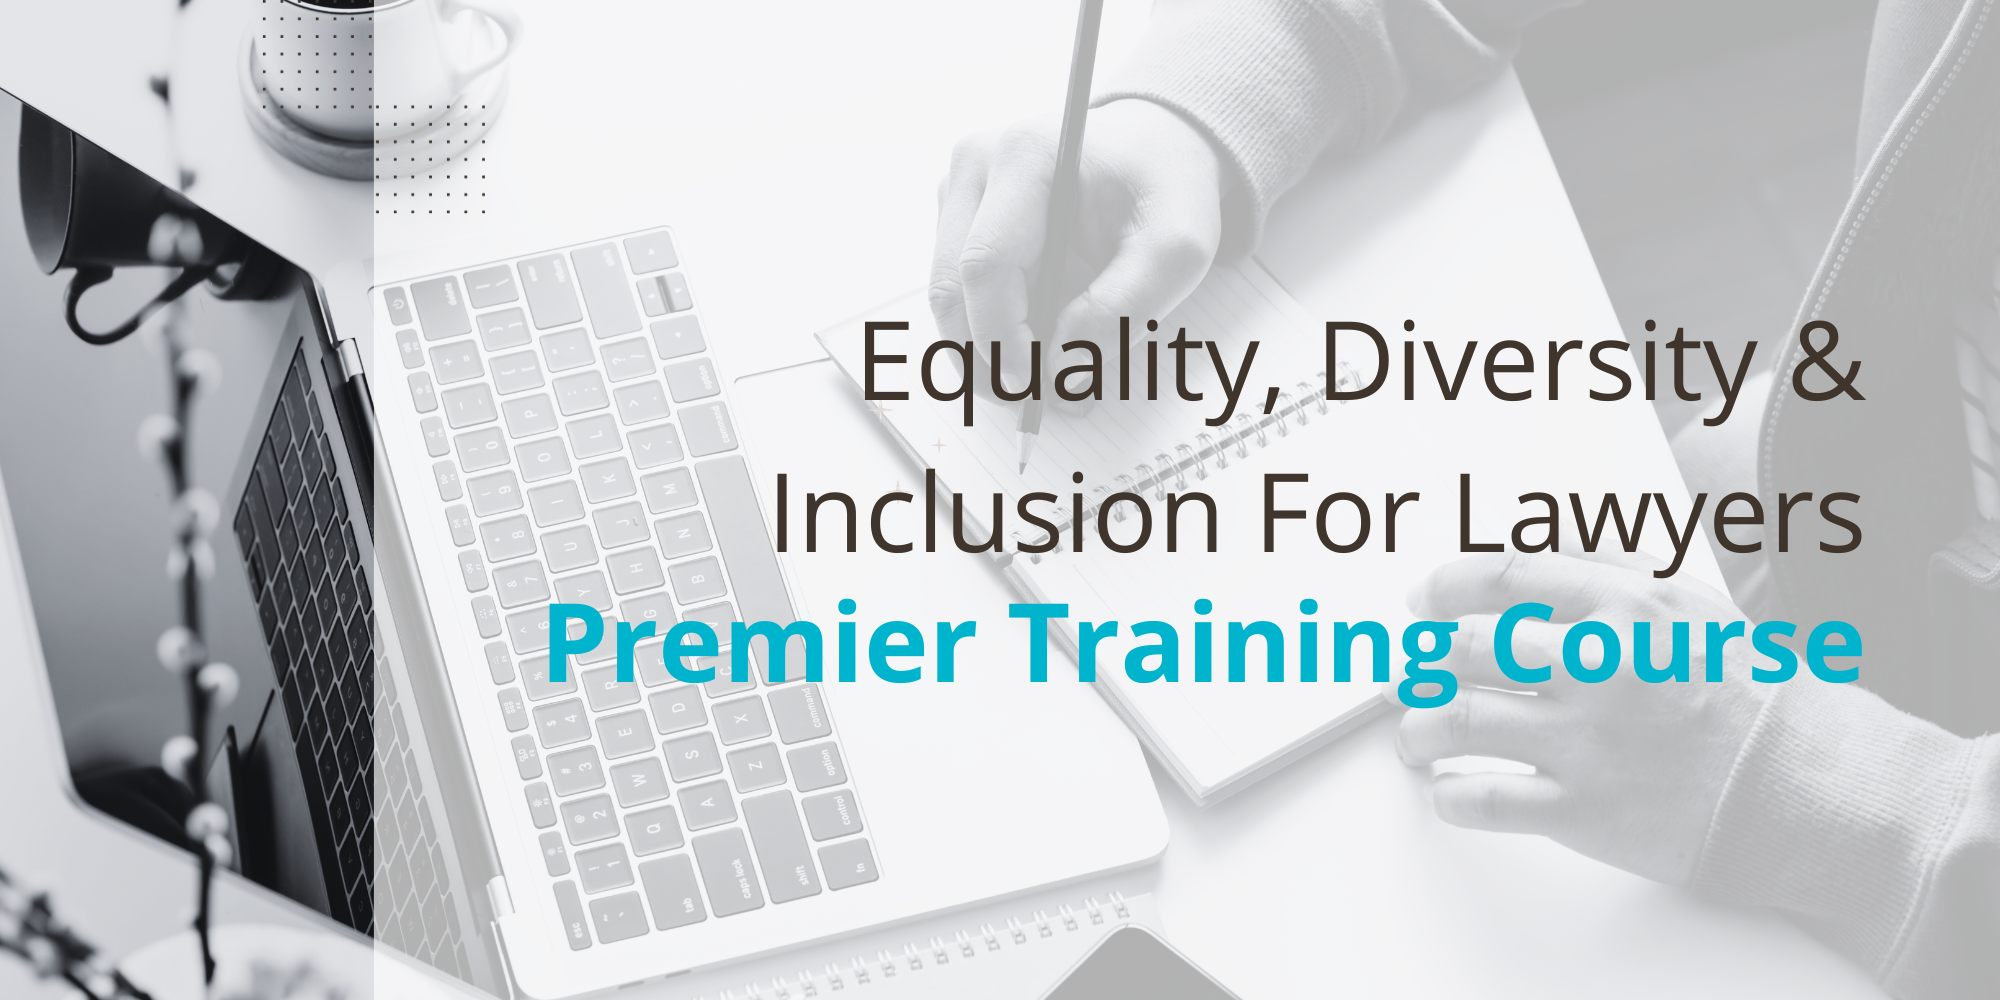 Equality, Diversity & Inclusion for Lawyers Course